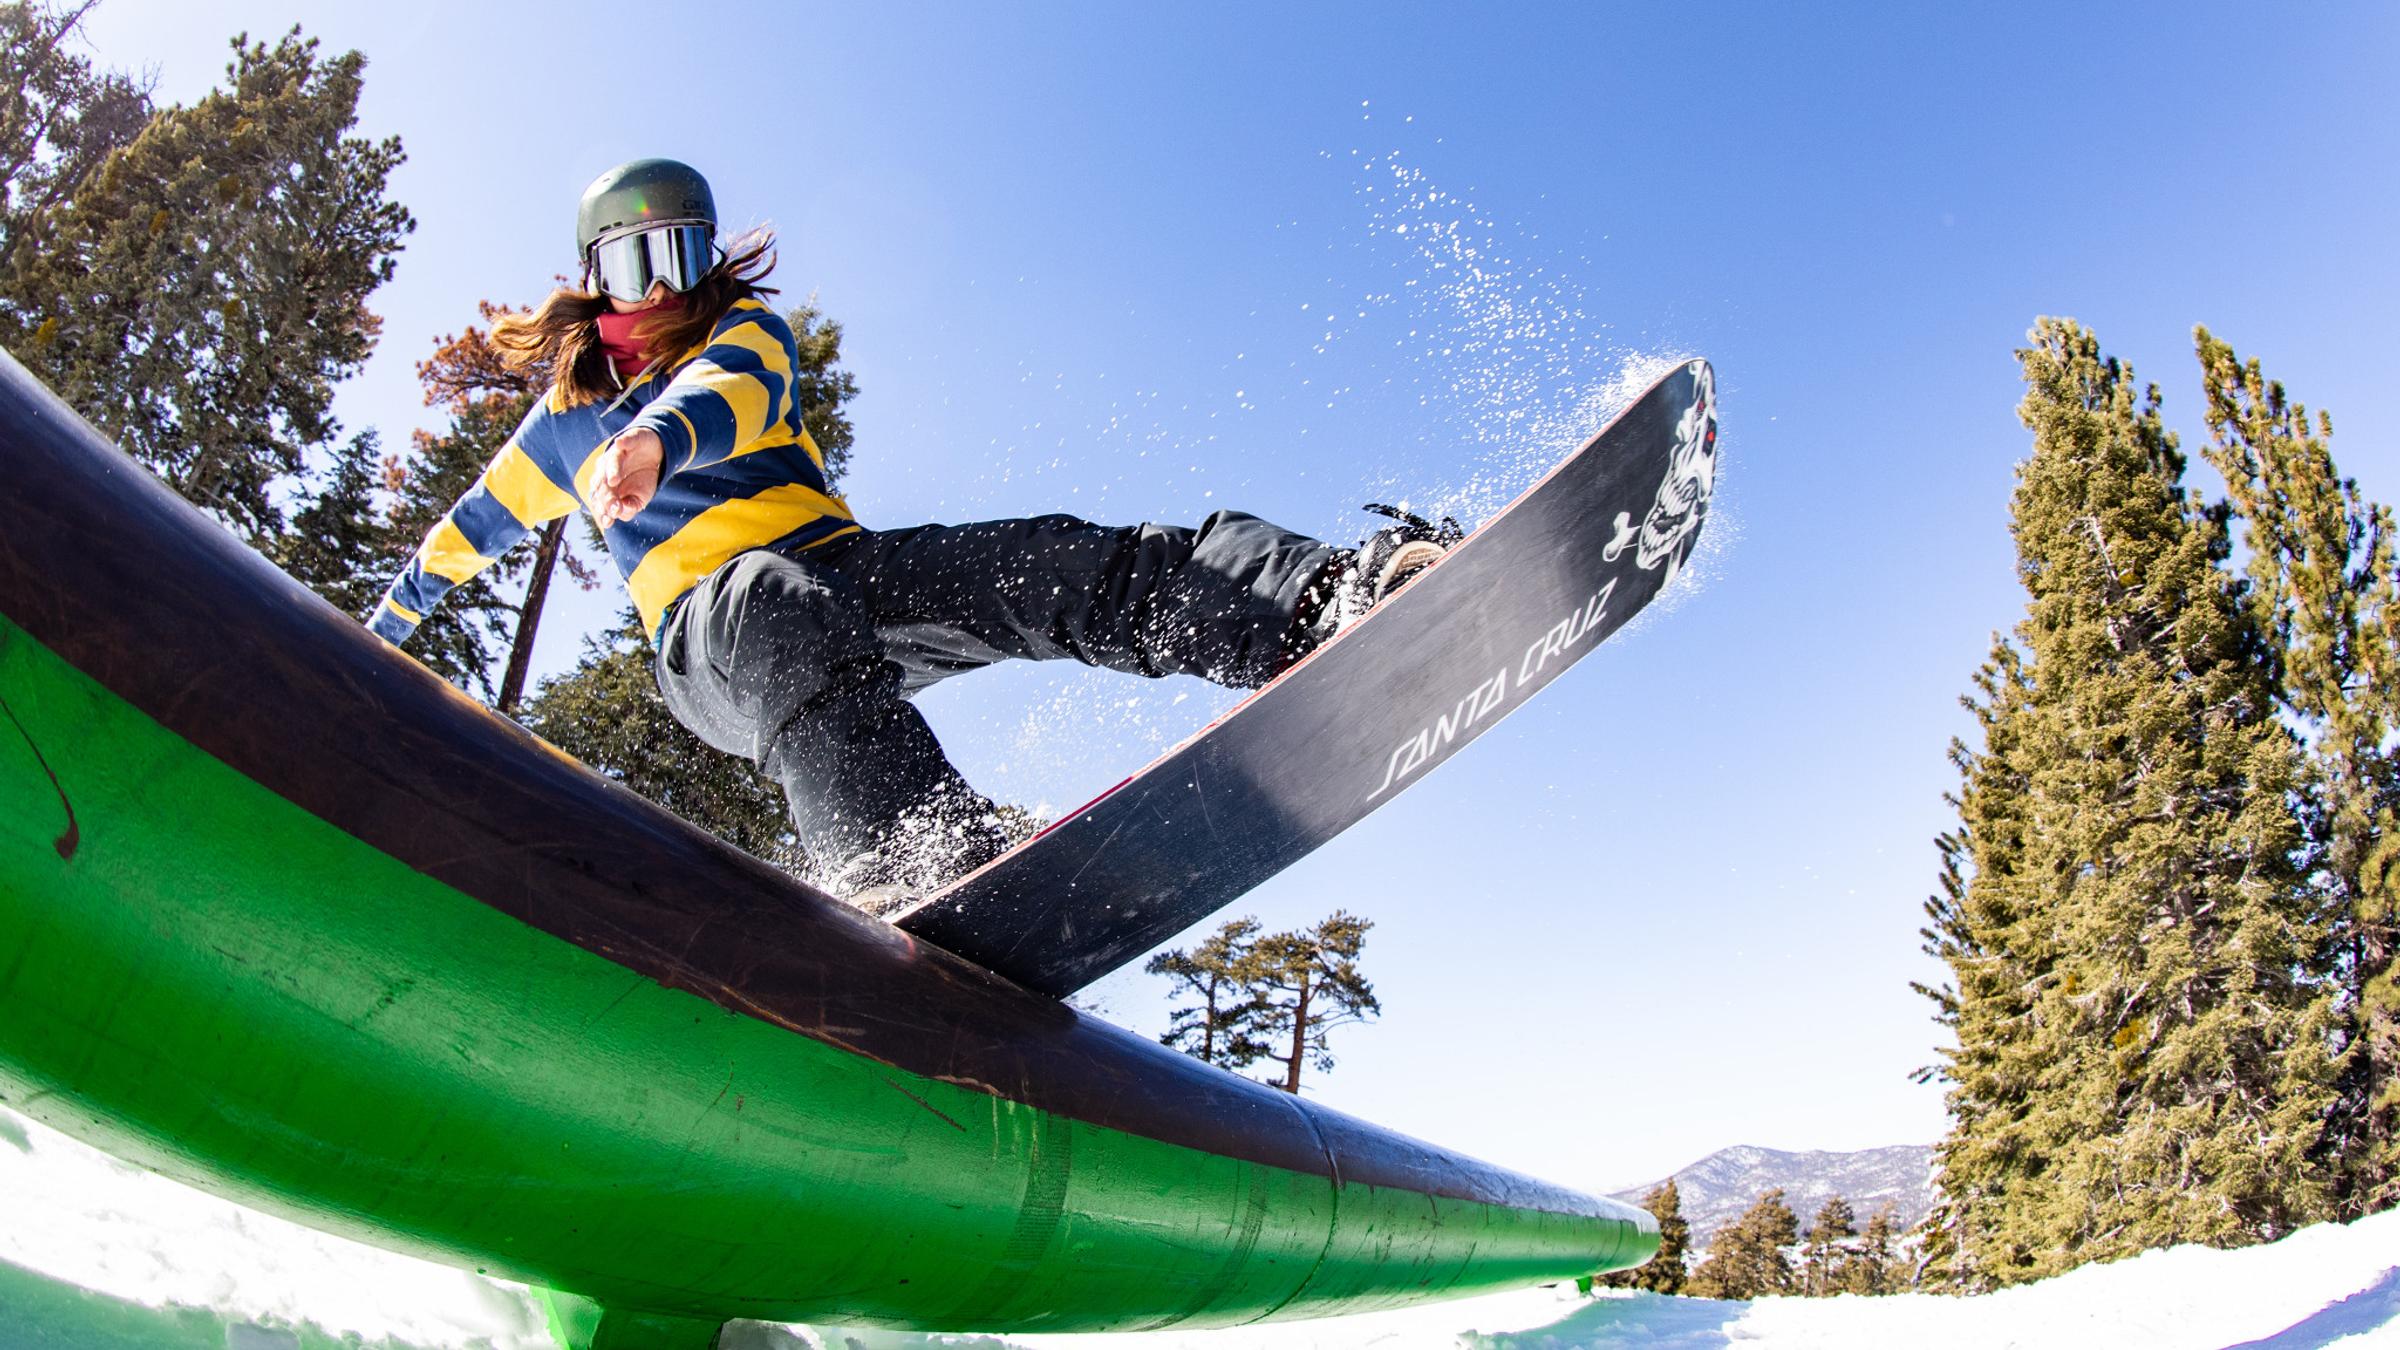 Snowboarder on a green rail feature